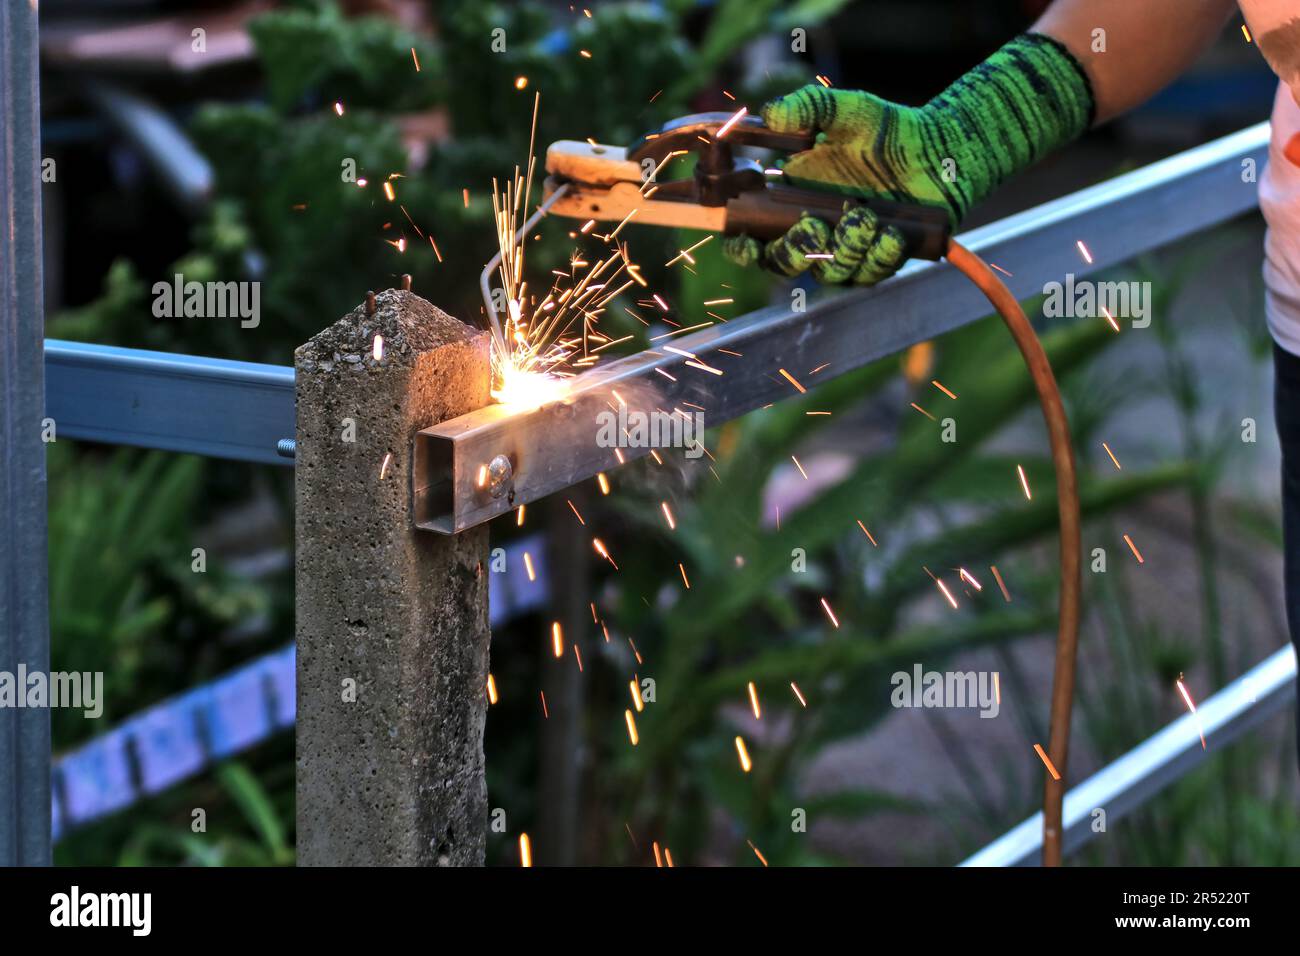 Welder. Construction work and welding industry. Work that often causes accidents caused by sparks. work safety protection concept Stock Photo